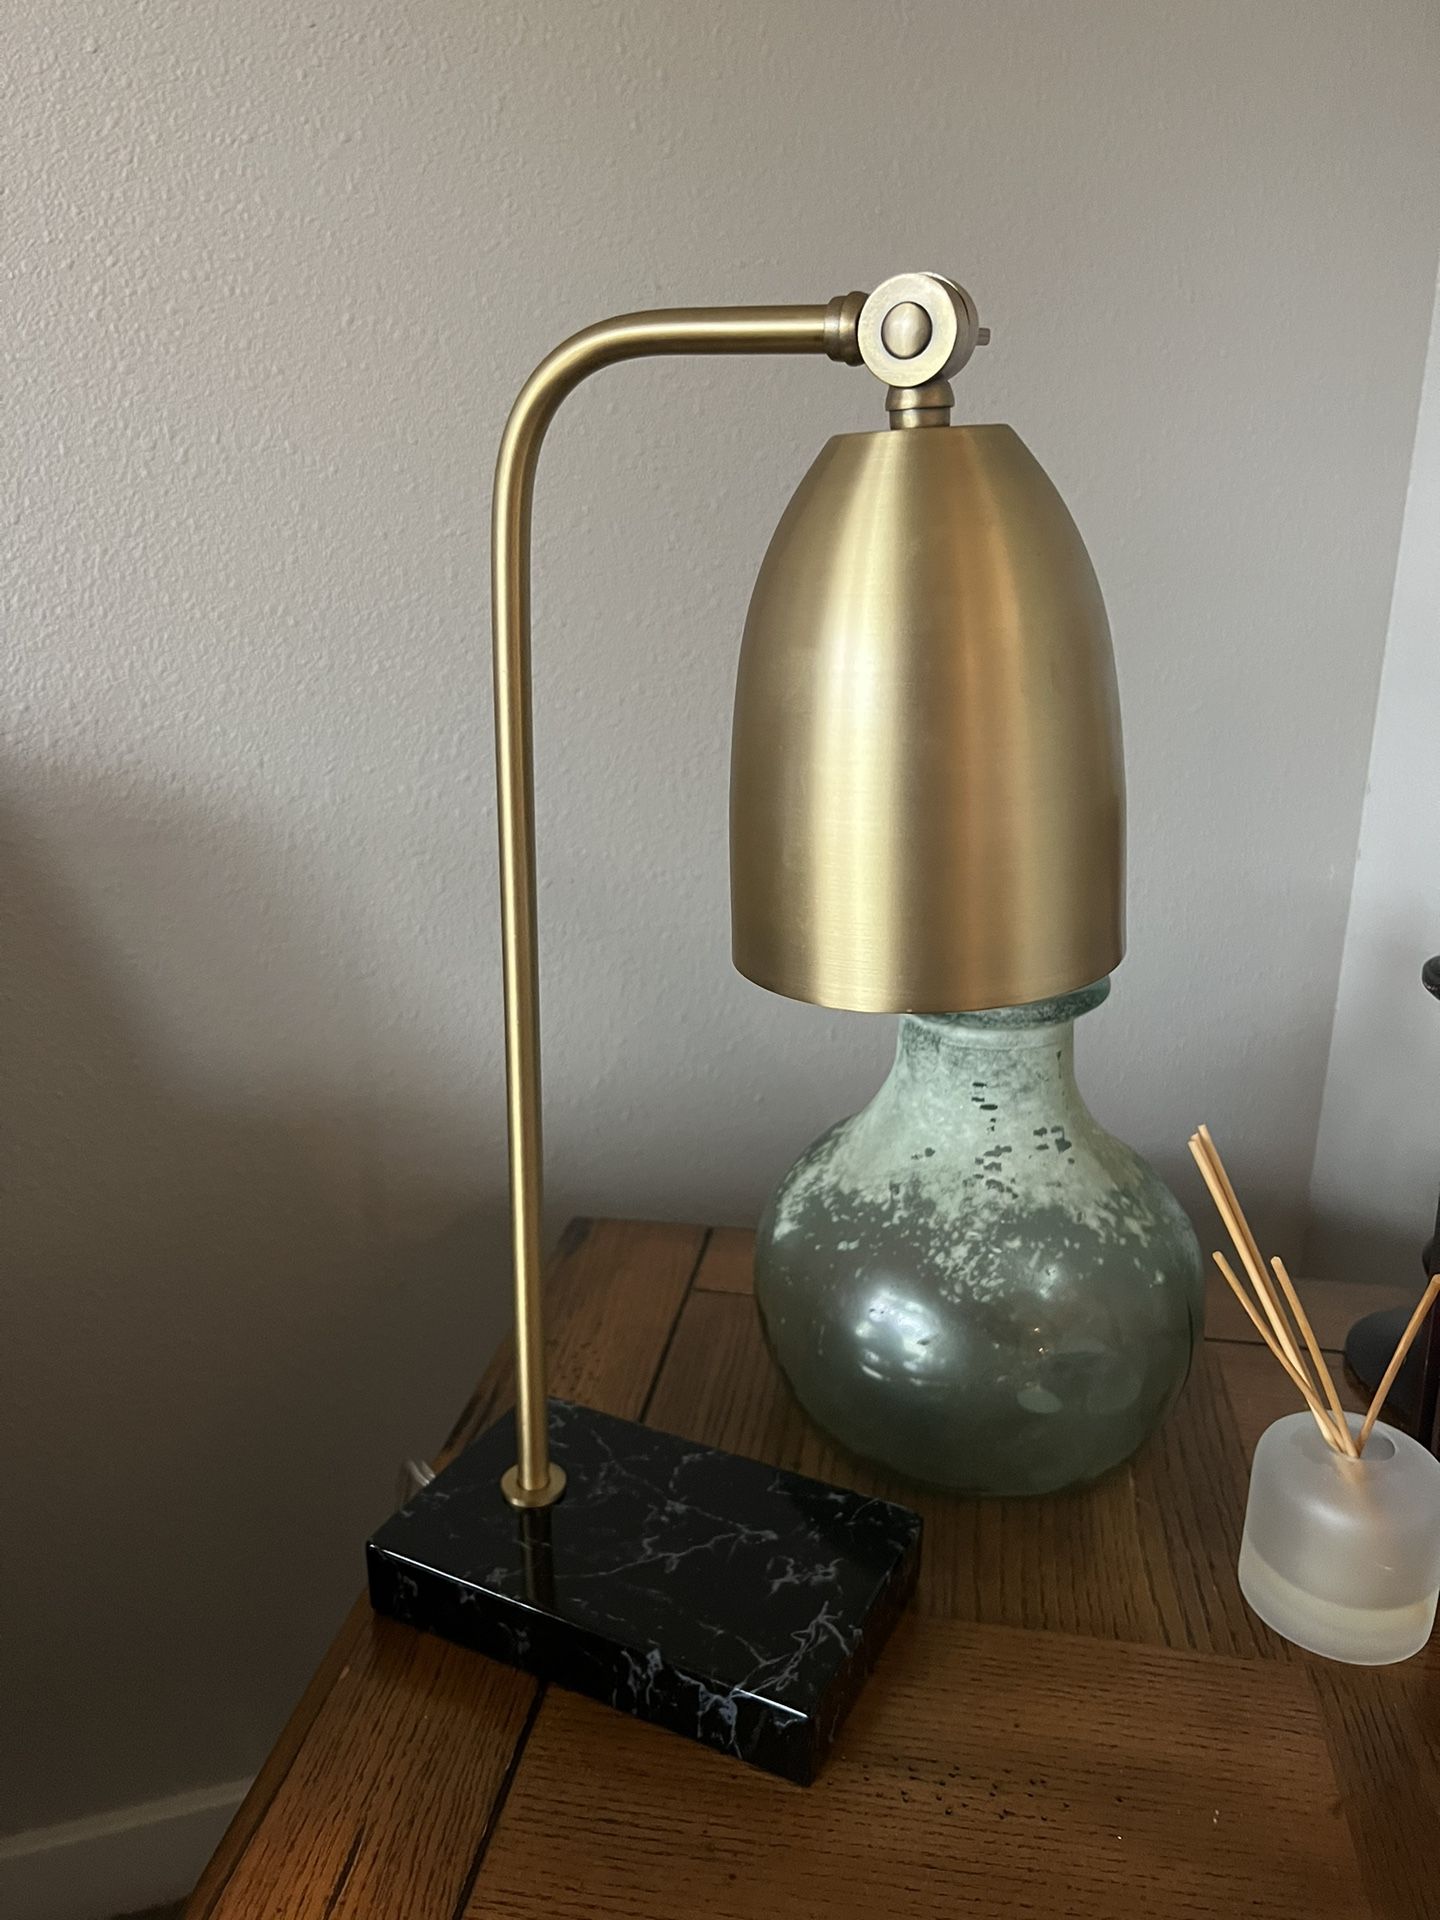 Antique Brass Desk Lamp with Adjustable Lamp Head